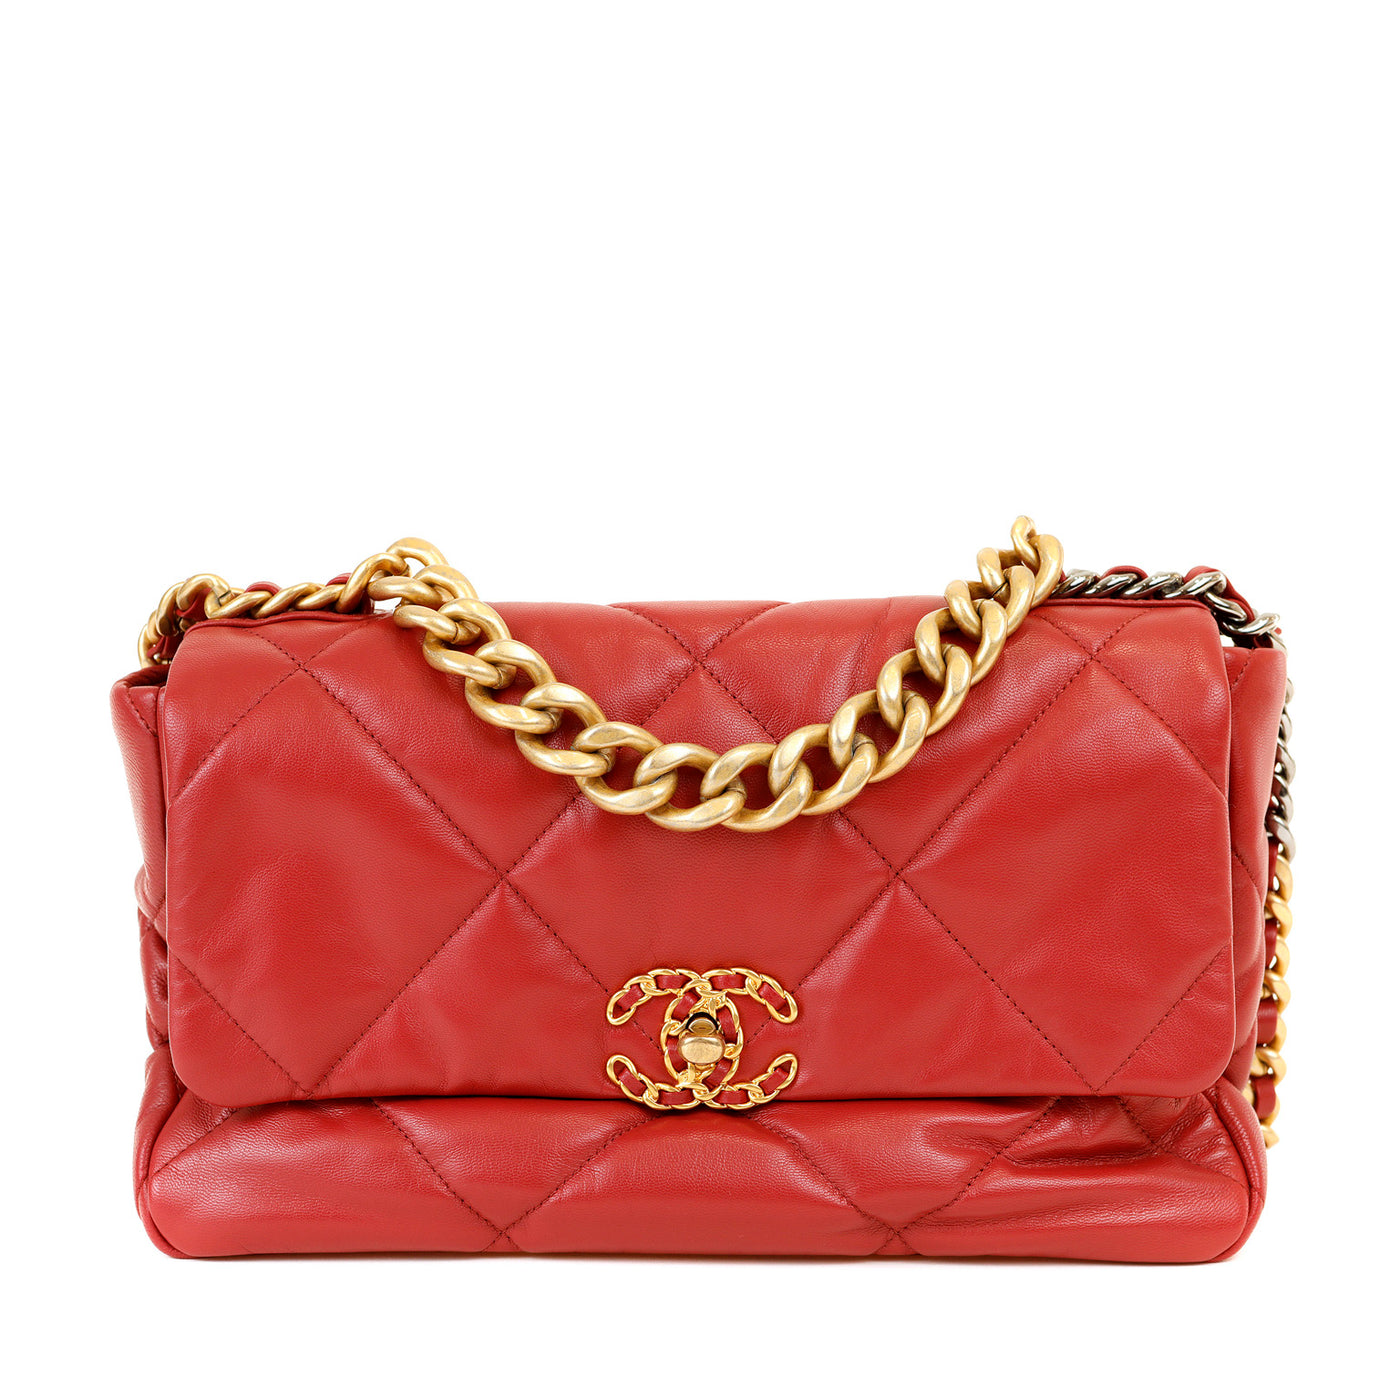 Chanel 19 Bag Red Lipstick Jumbo with Mixed Hardware